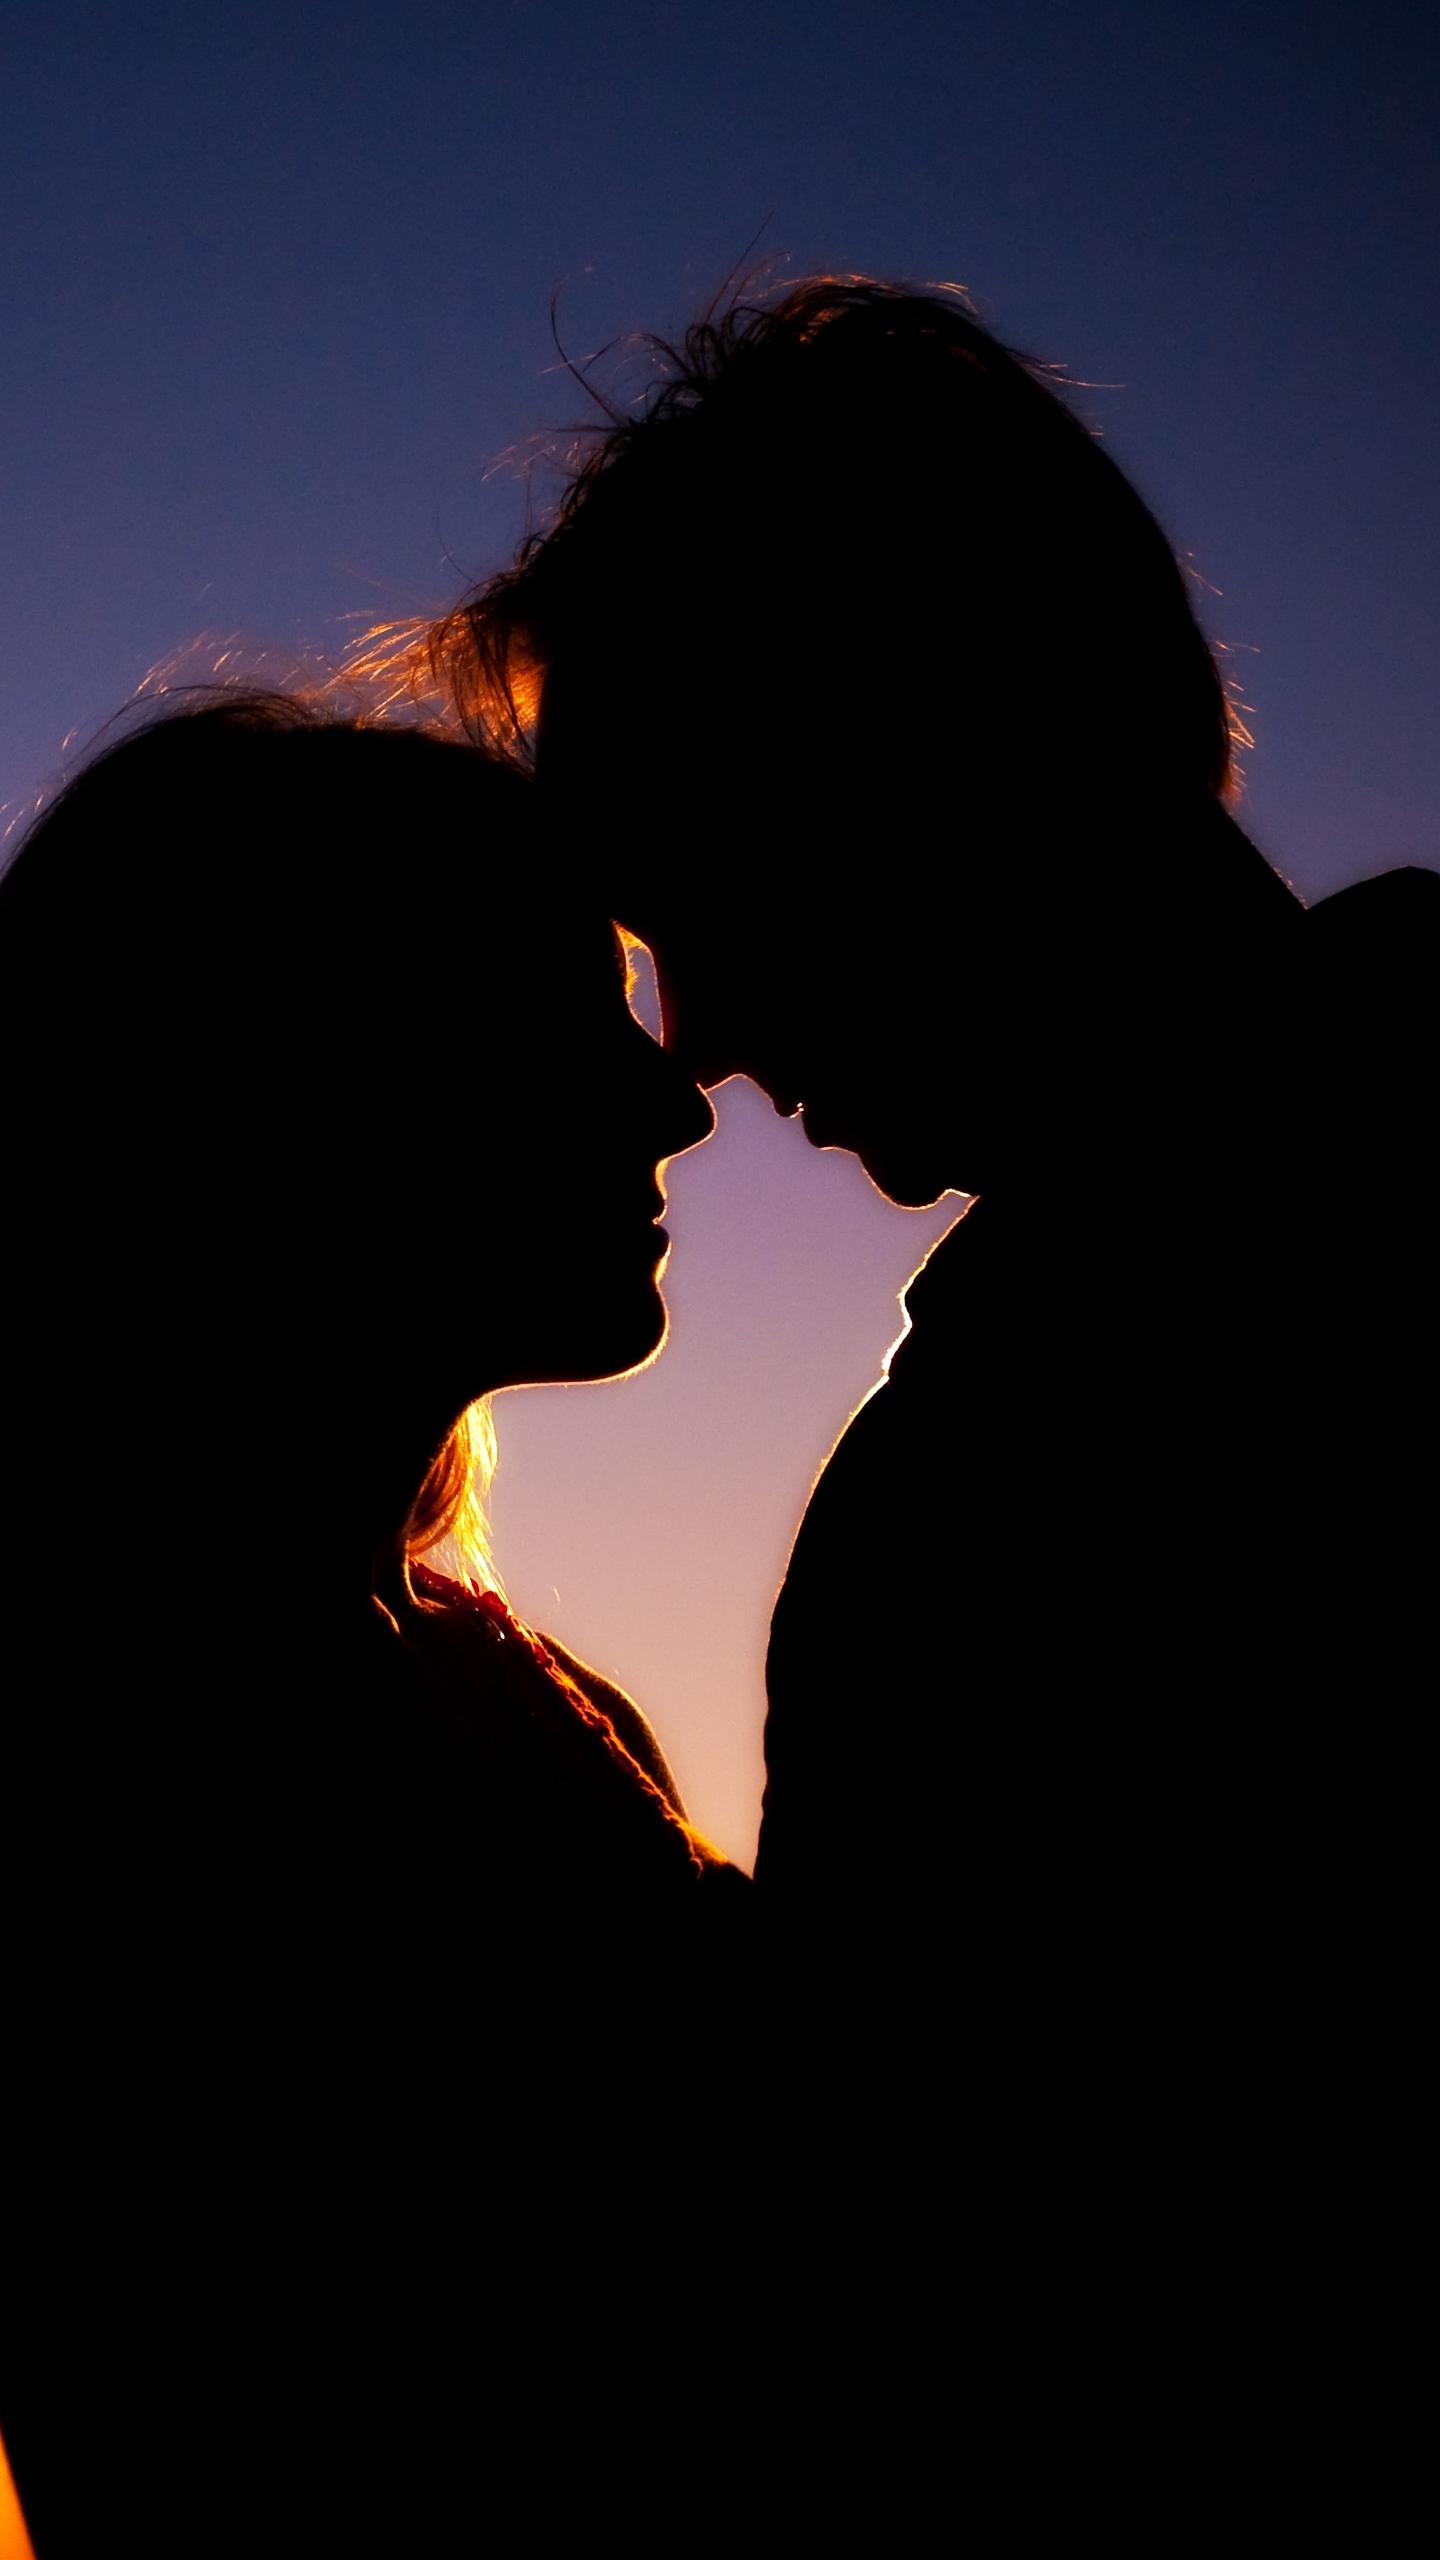 Wallpaper Couple, Silhouettes, Love, Night - Android Lock Screen Love - HD Wallpaper 